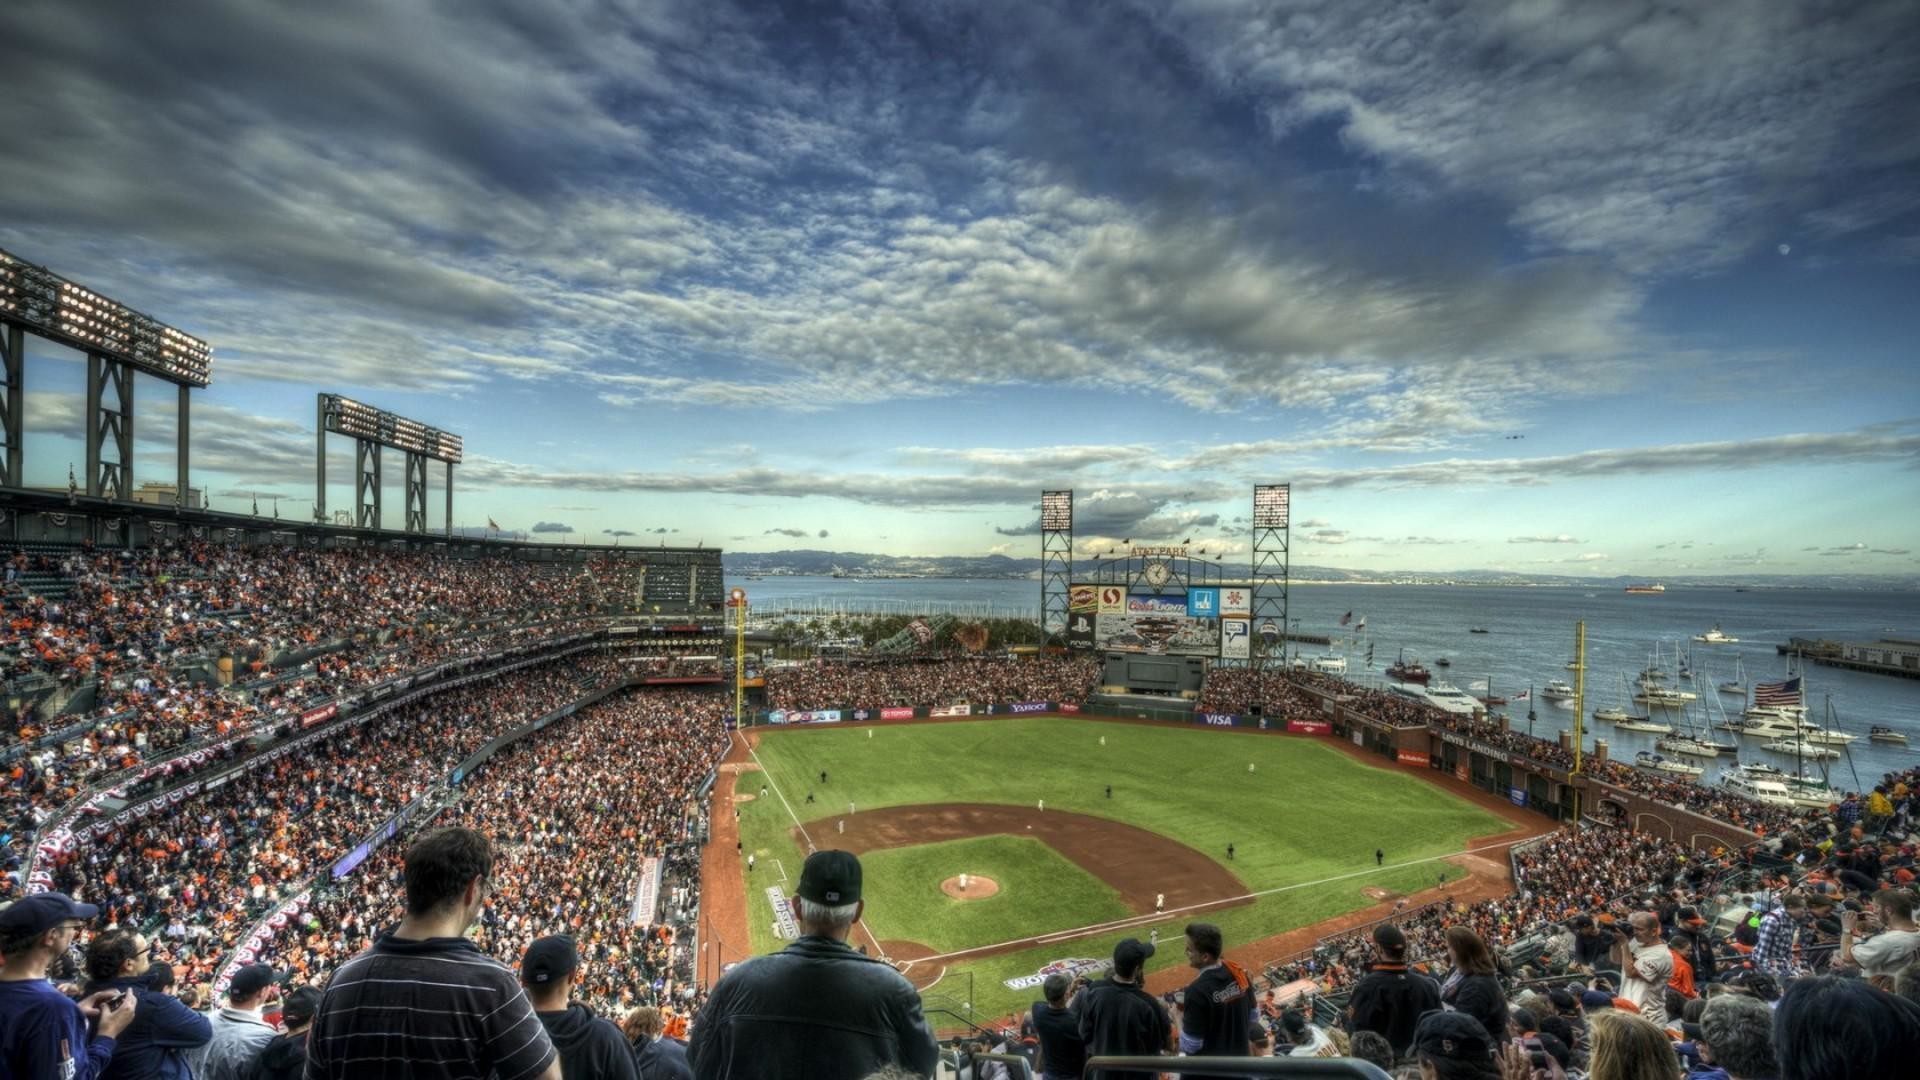 1920x1080 Download Free San Francisco Giants Wallpapers | Wallpapers .